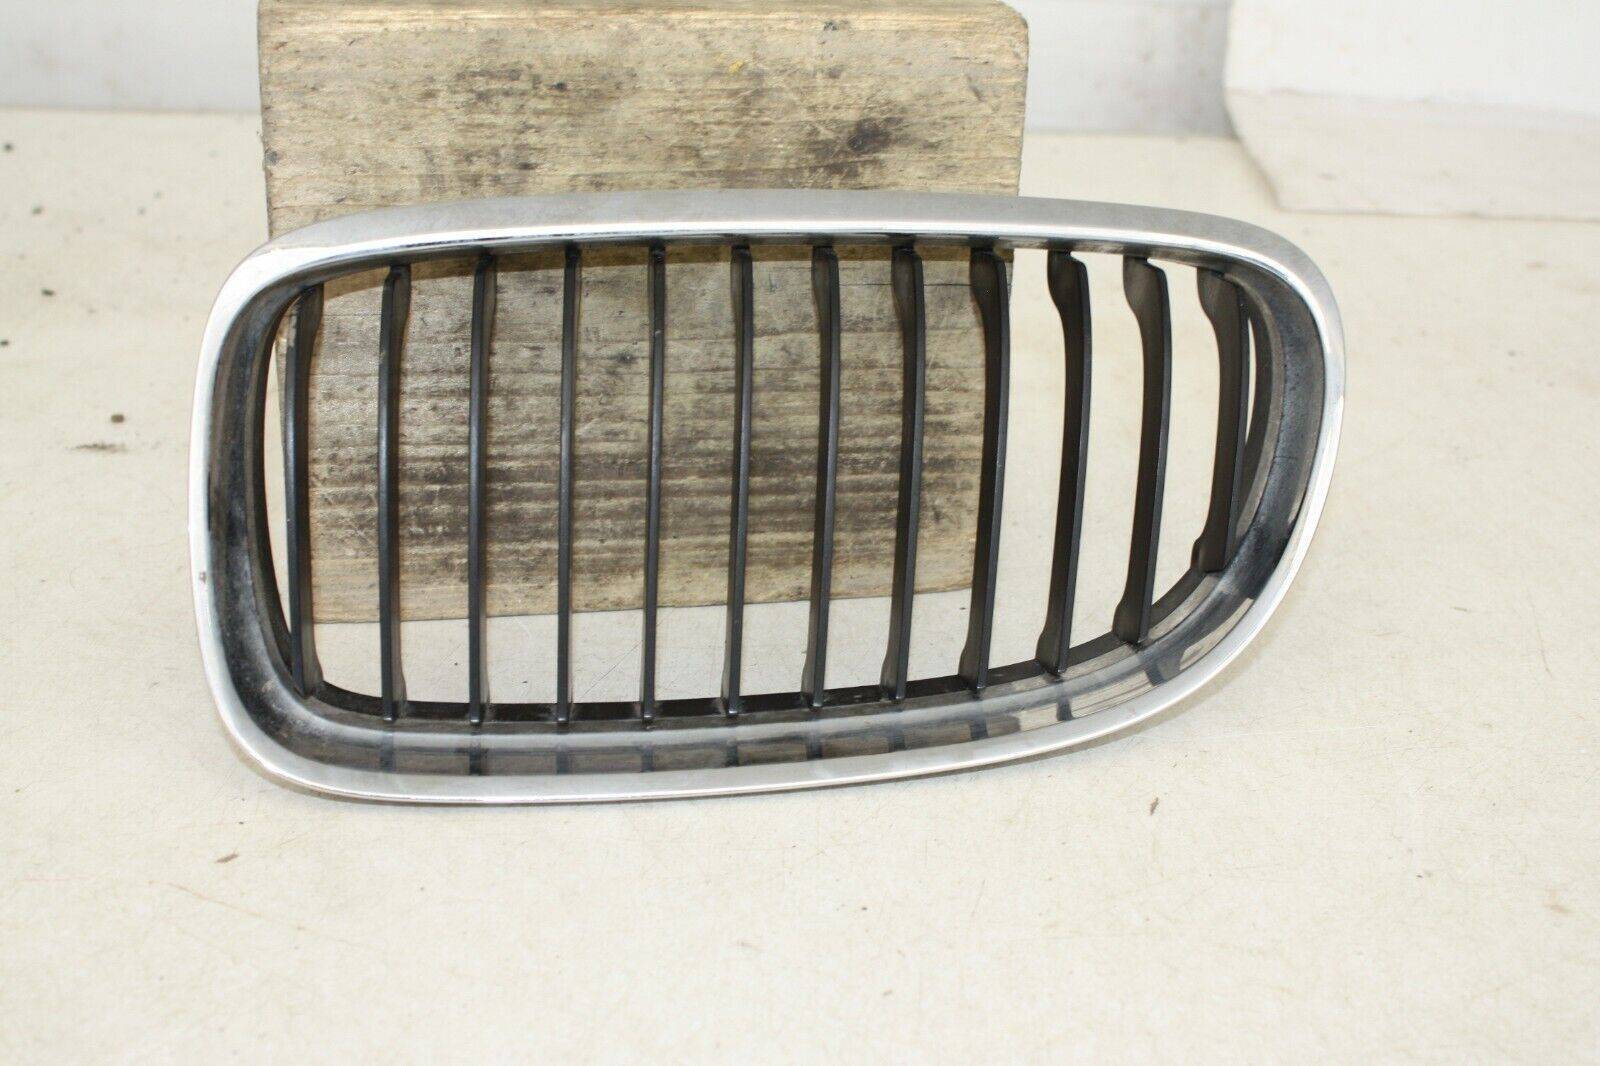 BMW-3-SERIES-FRONT-BUMPER-KIDNEY-GRILL-LEFT-2008-TO-2012-175367532000-2